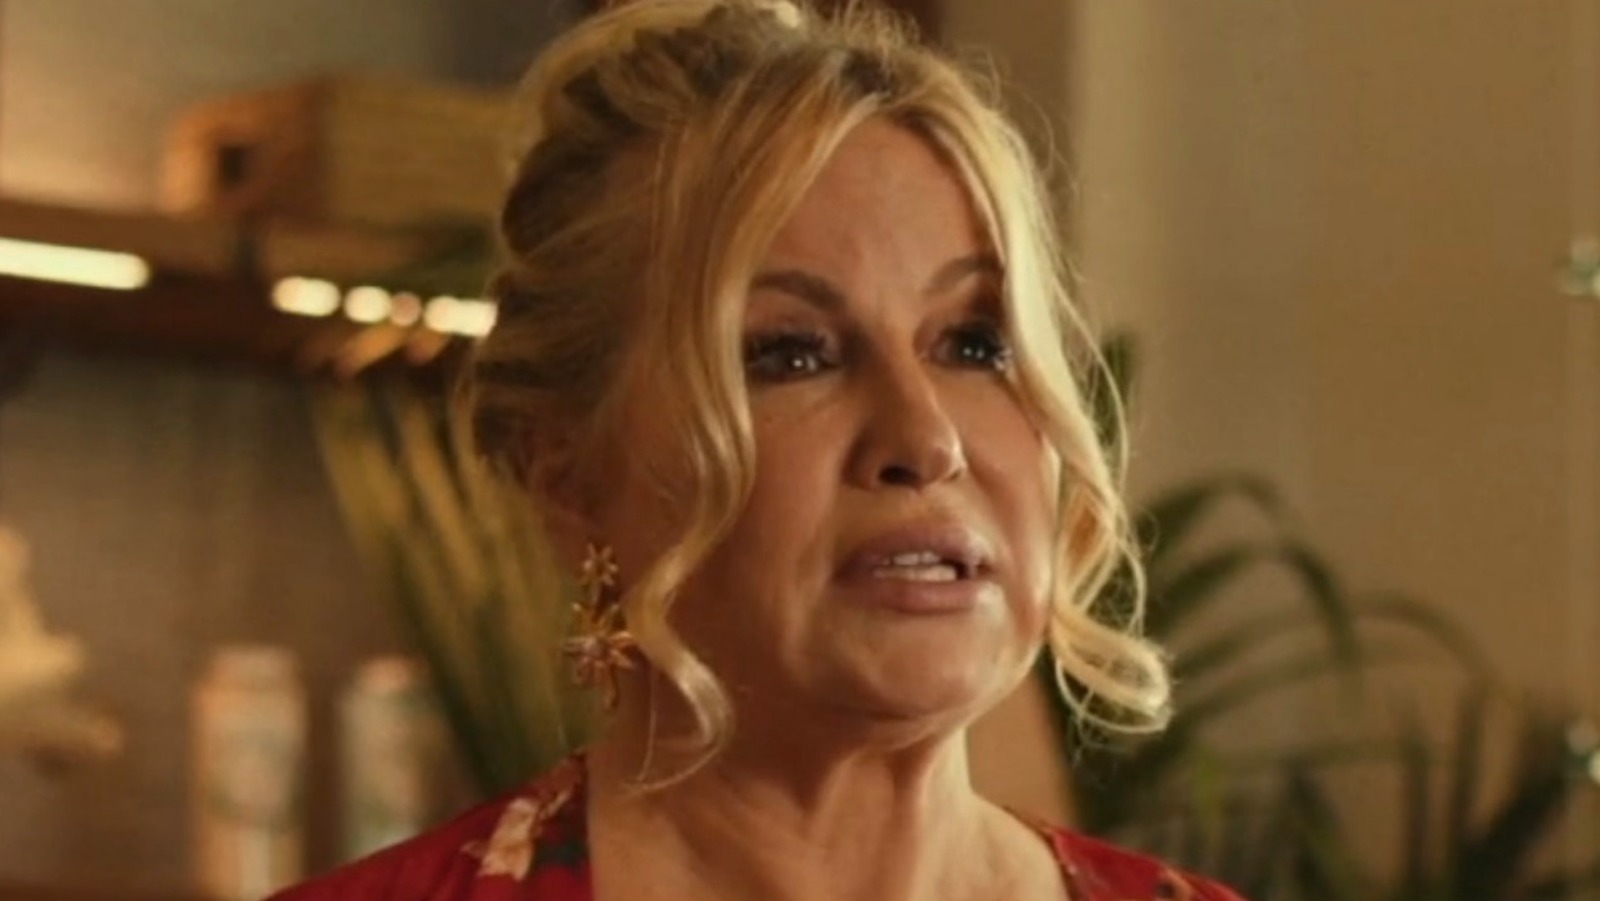 Jennifer Coolidge's Character In 'The White Lotus' Actually Has Some Sound  Dating Advice